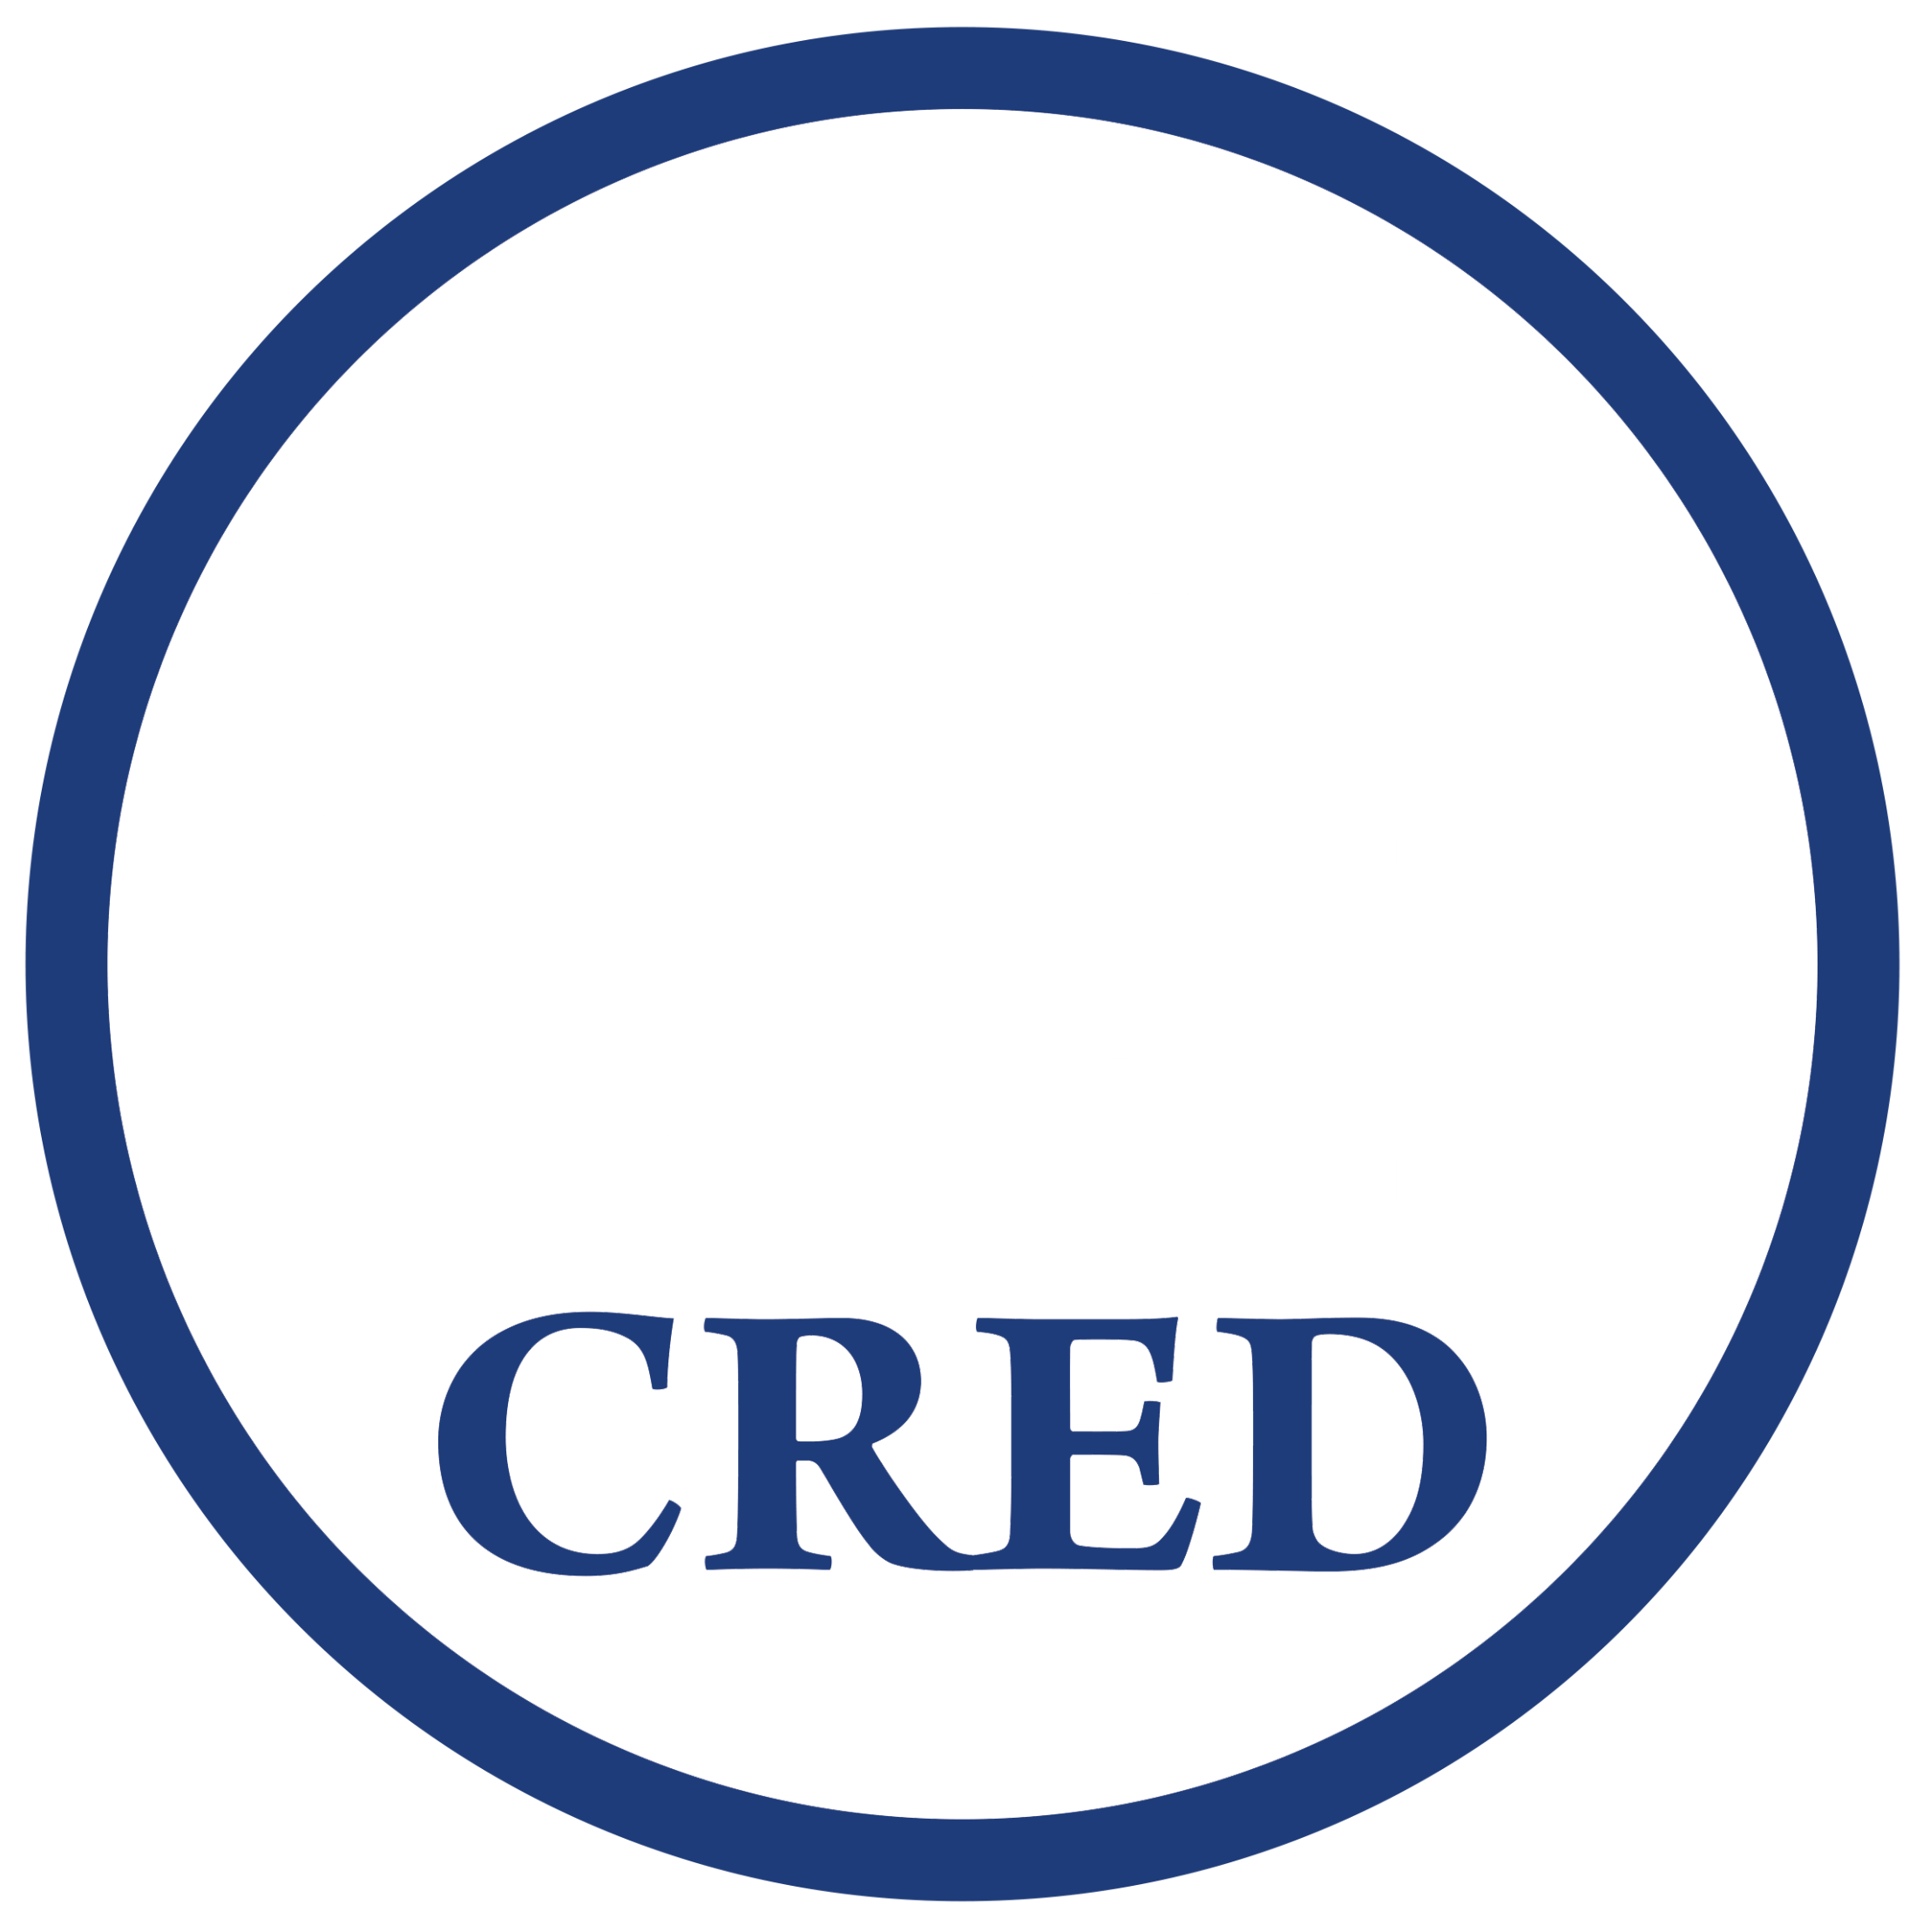 LIFE CRED